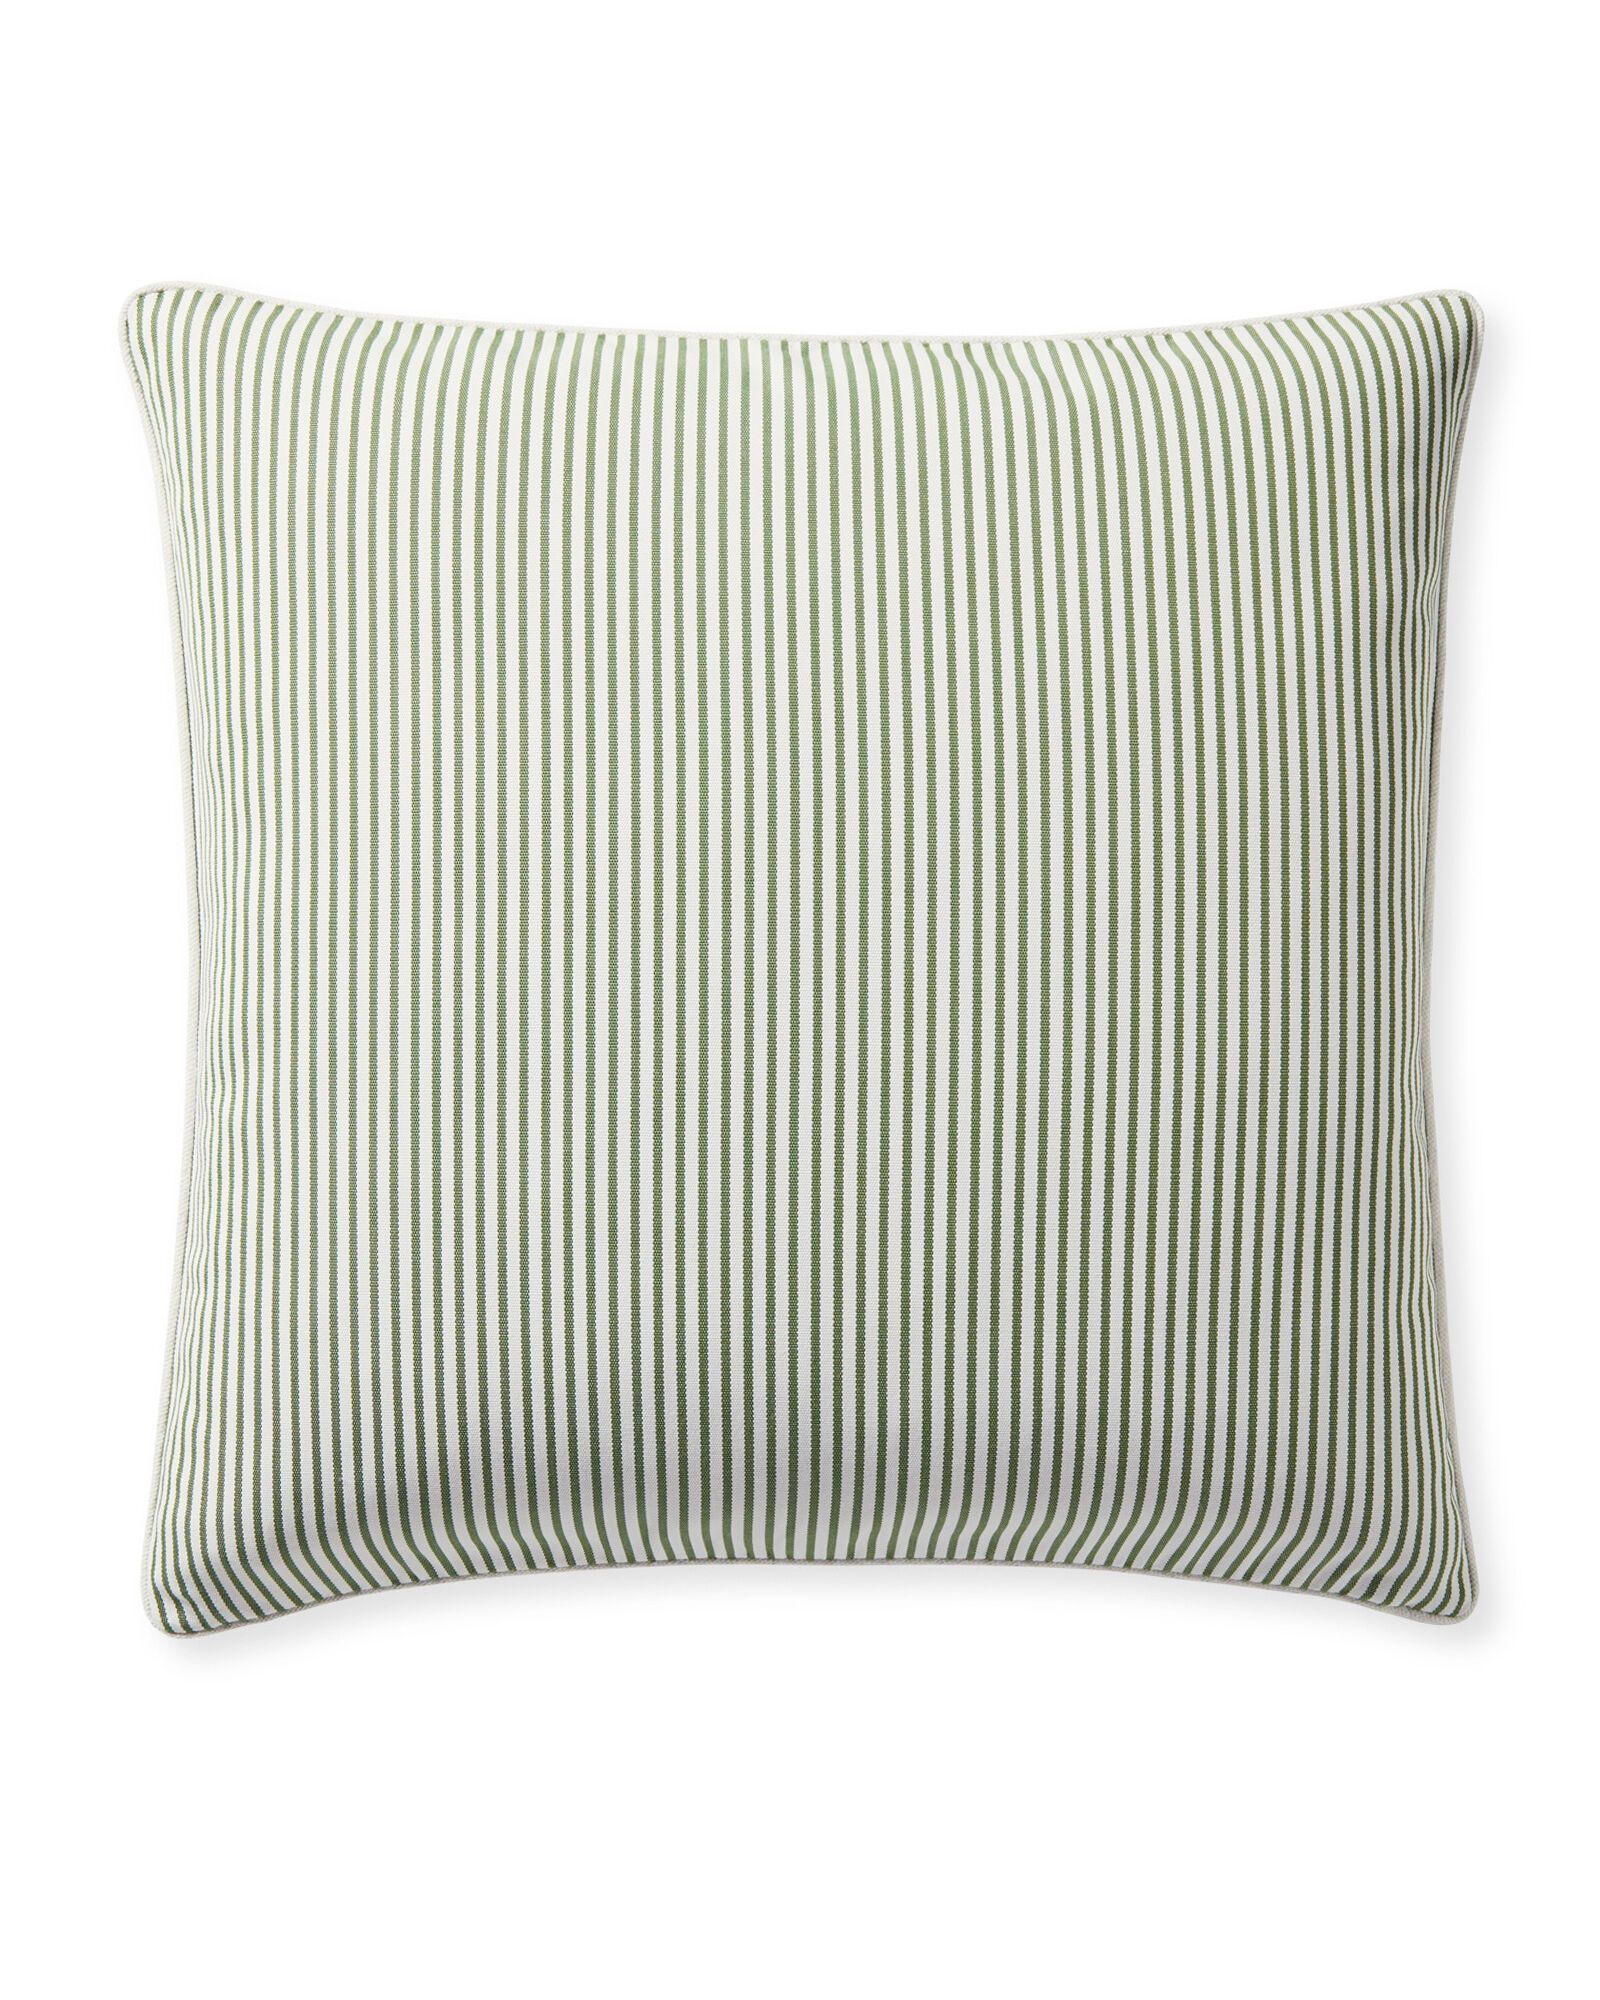 Perennials® Pinstripe Pillow Cover | Serena and Lily